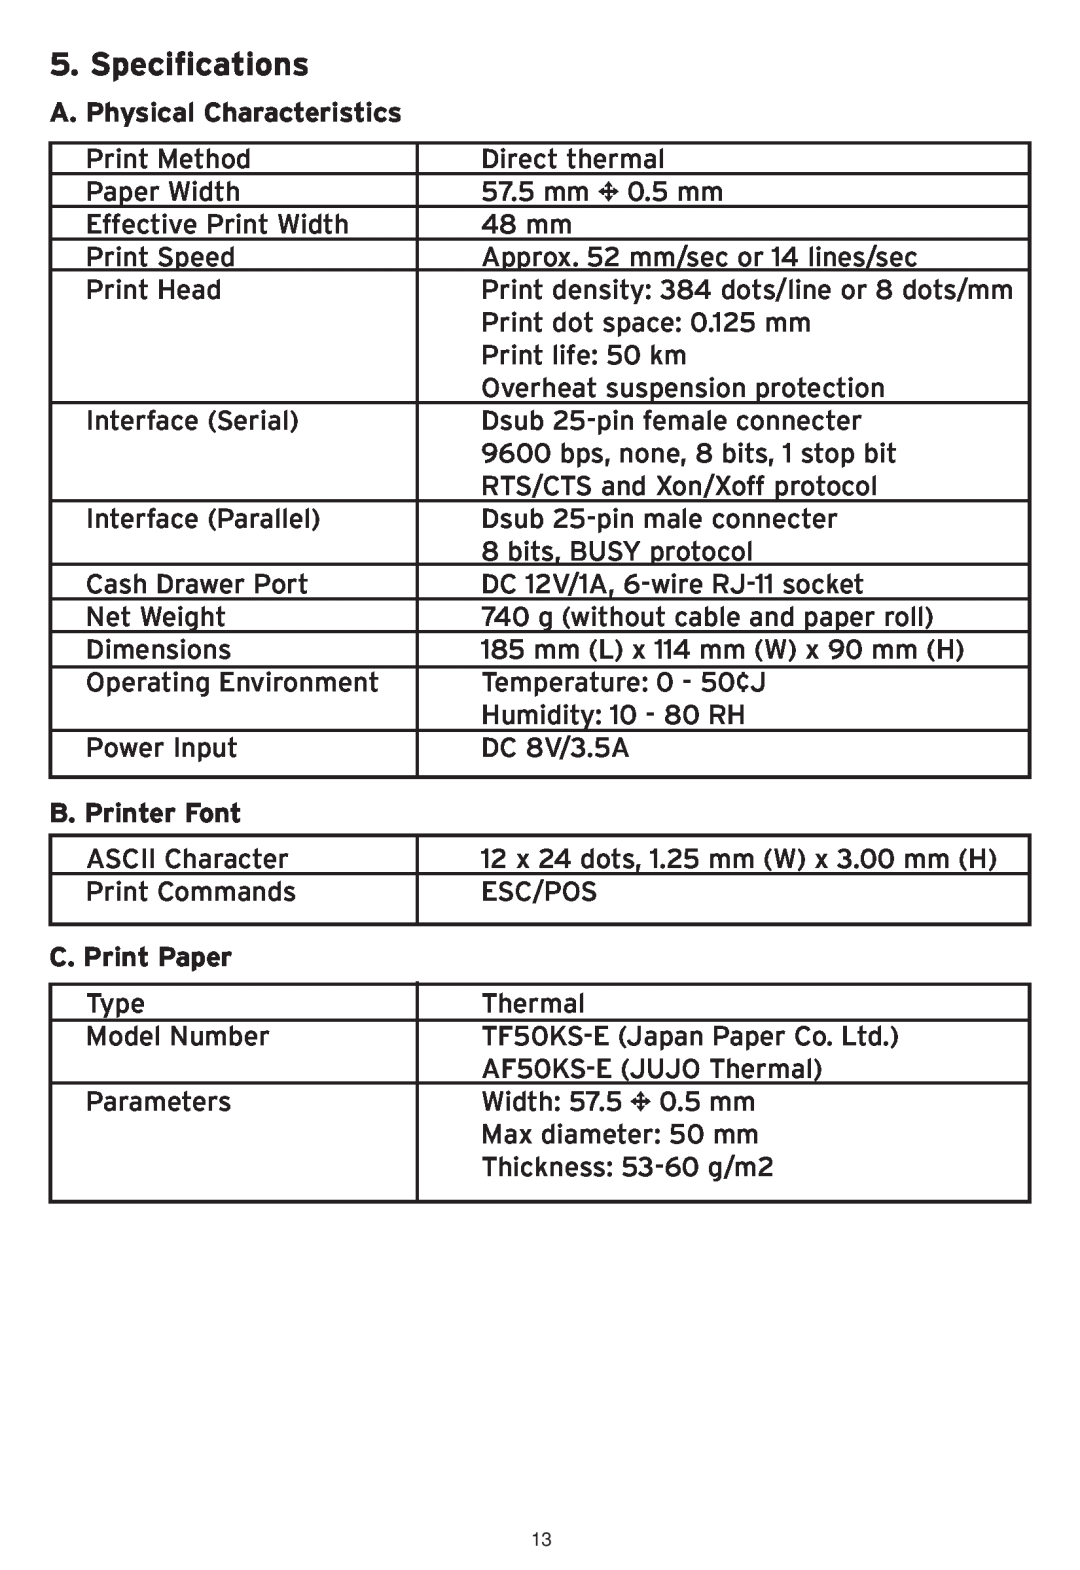 SMC Networks SMCWHS-POS manual Specifications, A. Physical Characteristics, B. Printer Font, C. Print Paper 